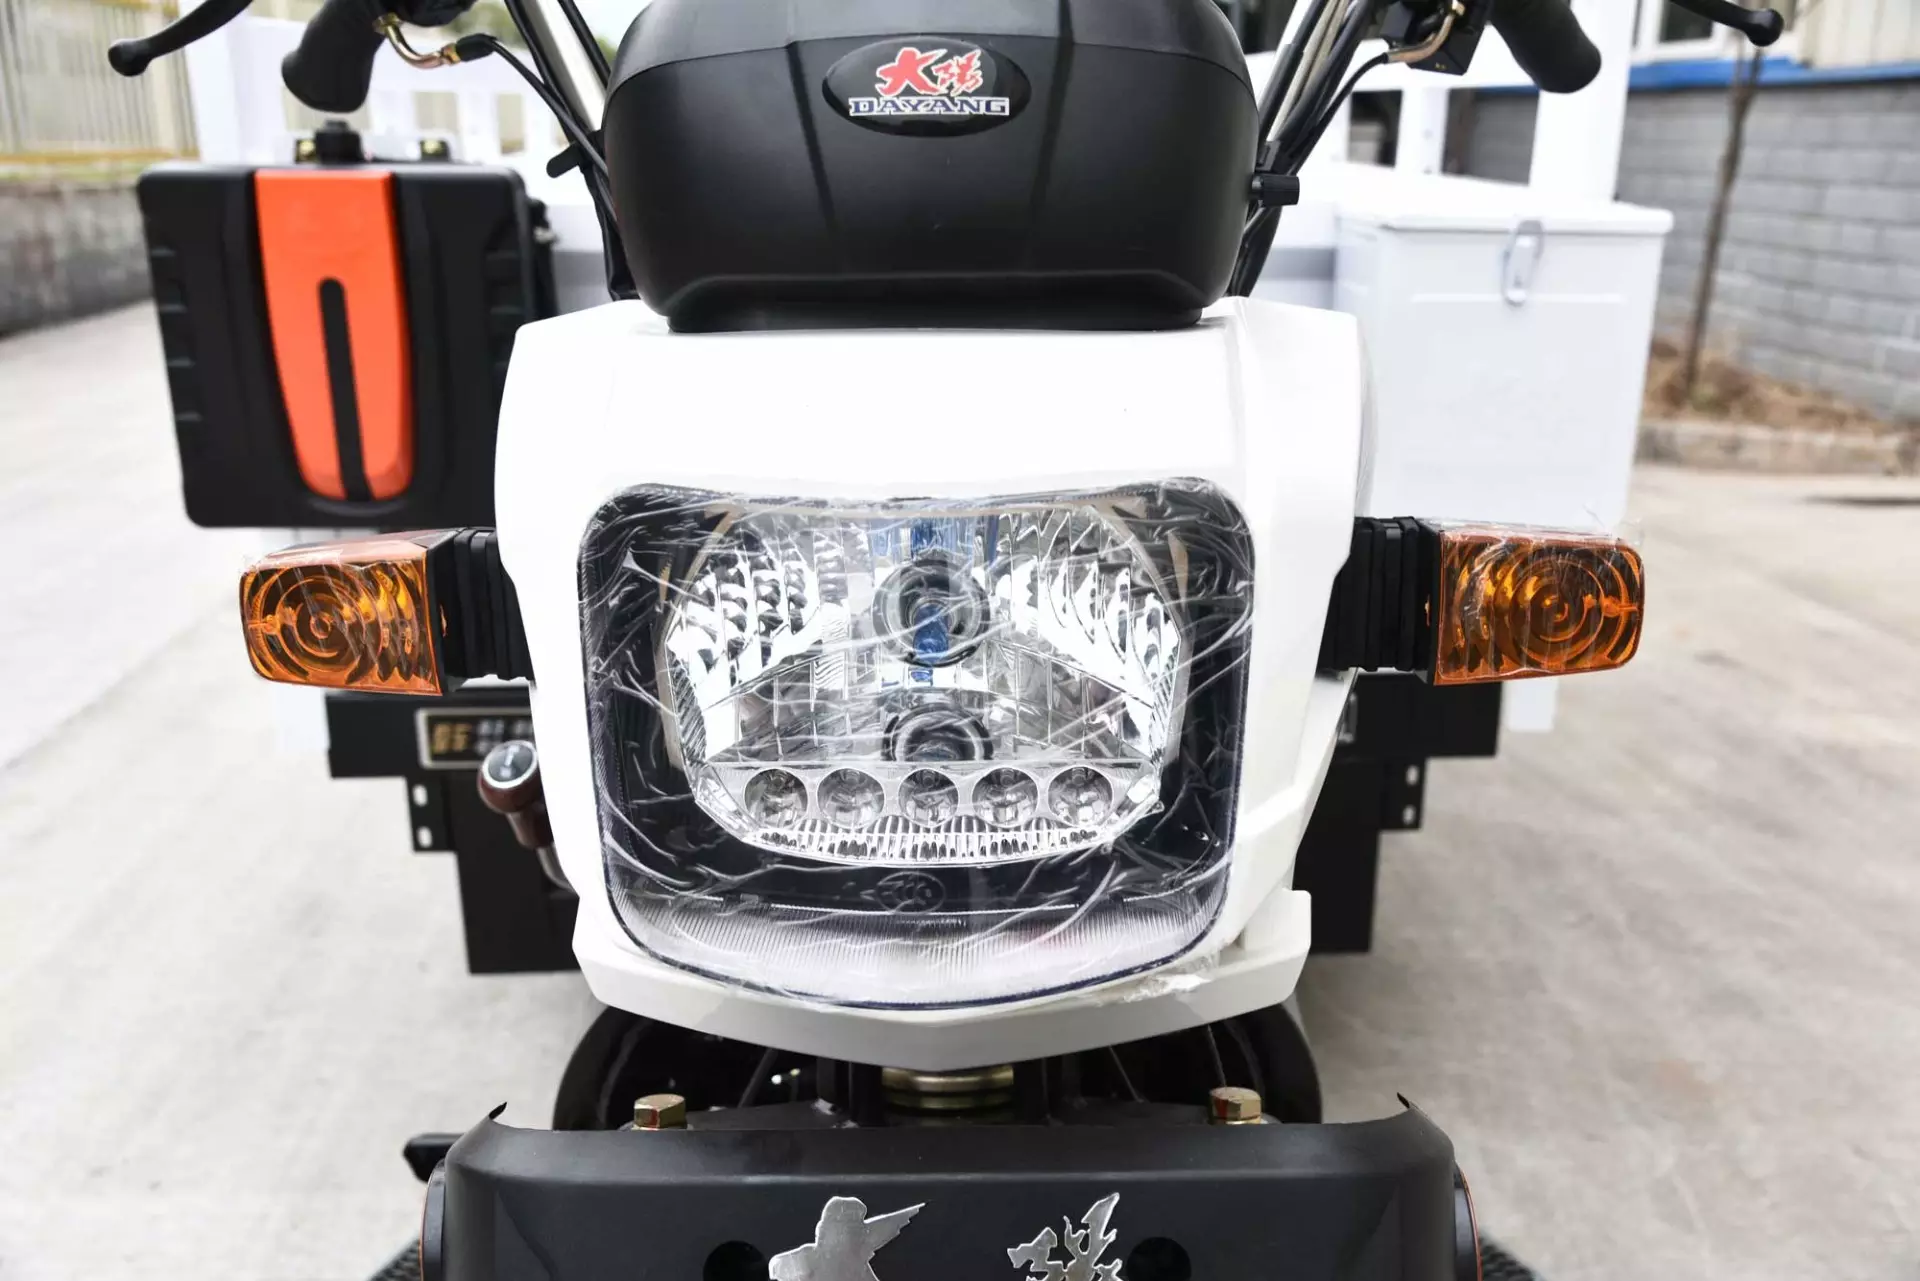 New design lamp 3 wheel motorcycle 150cc 250cc hot gasoline engine heavy load cargo scooter tricycle